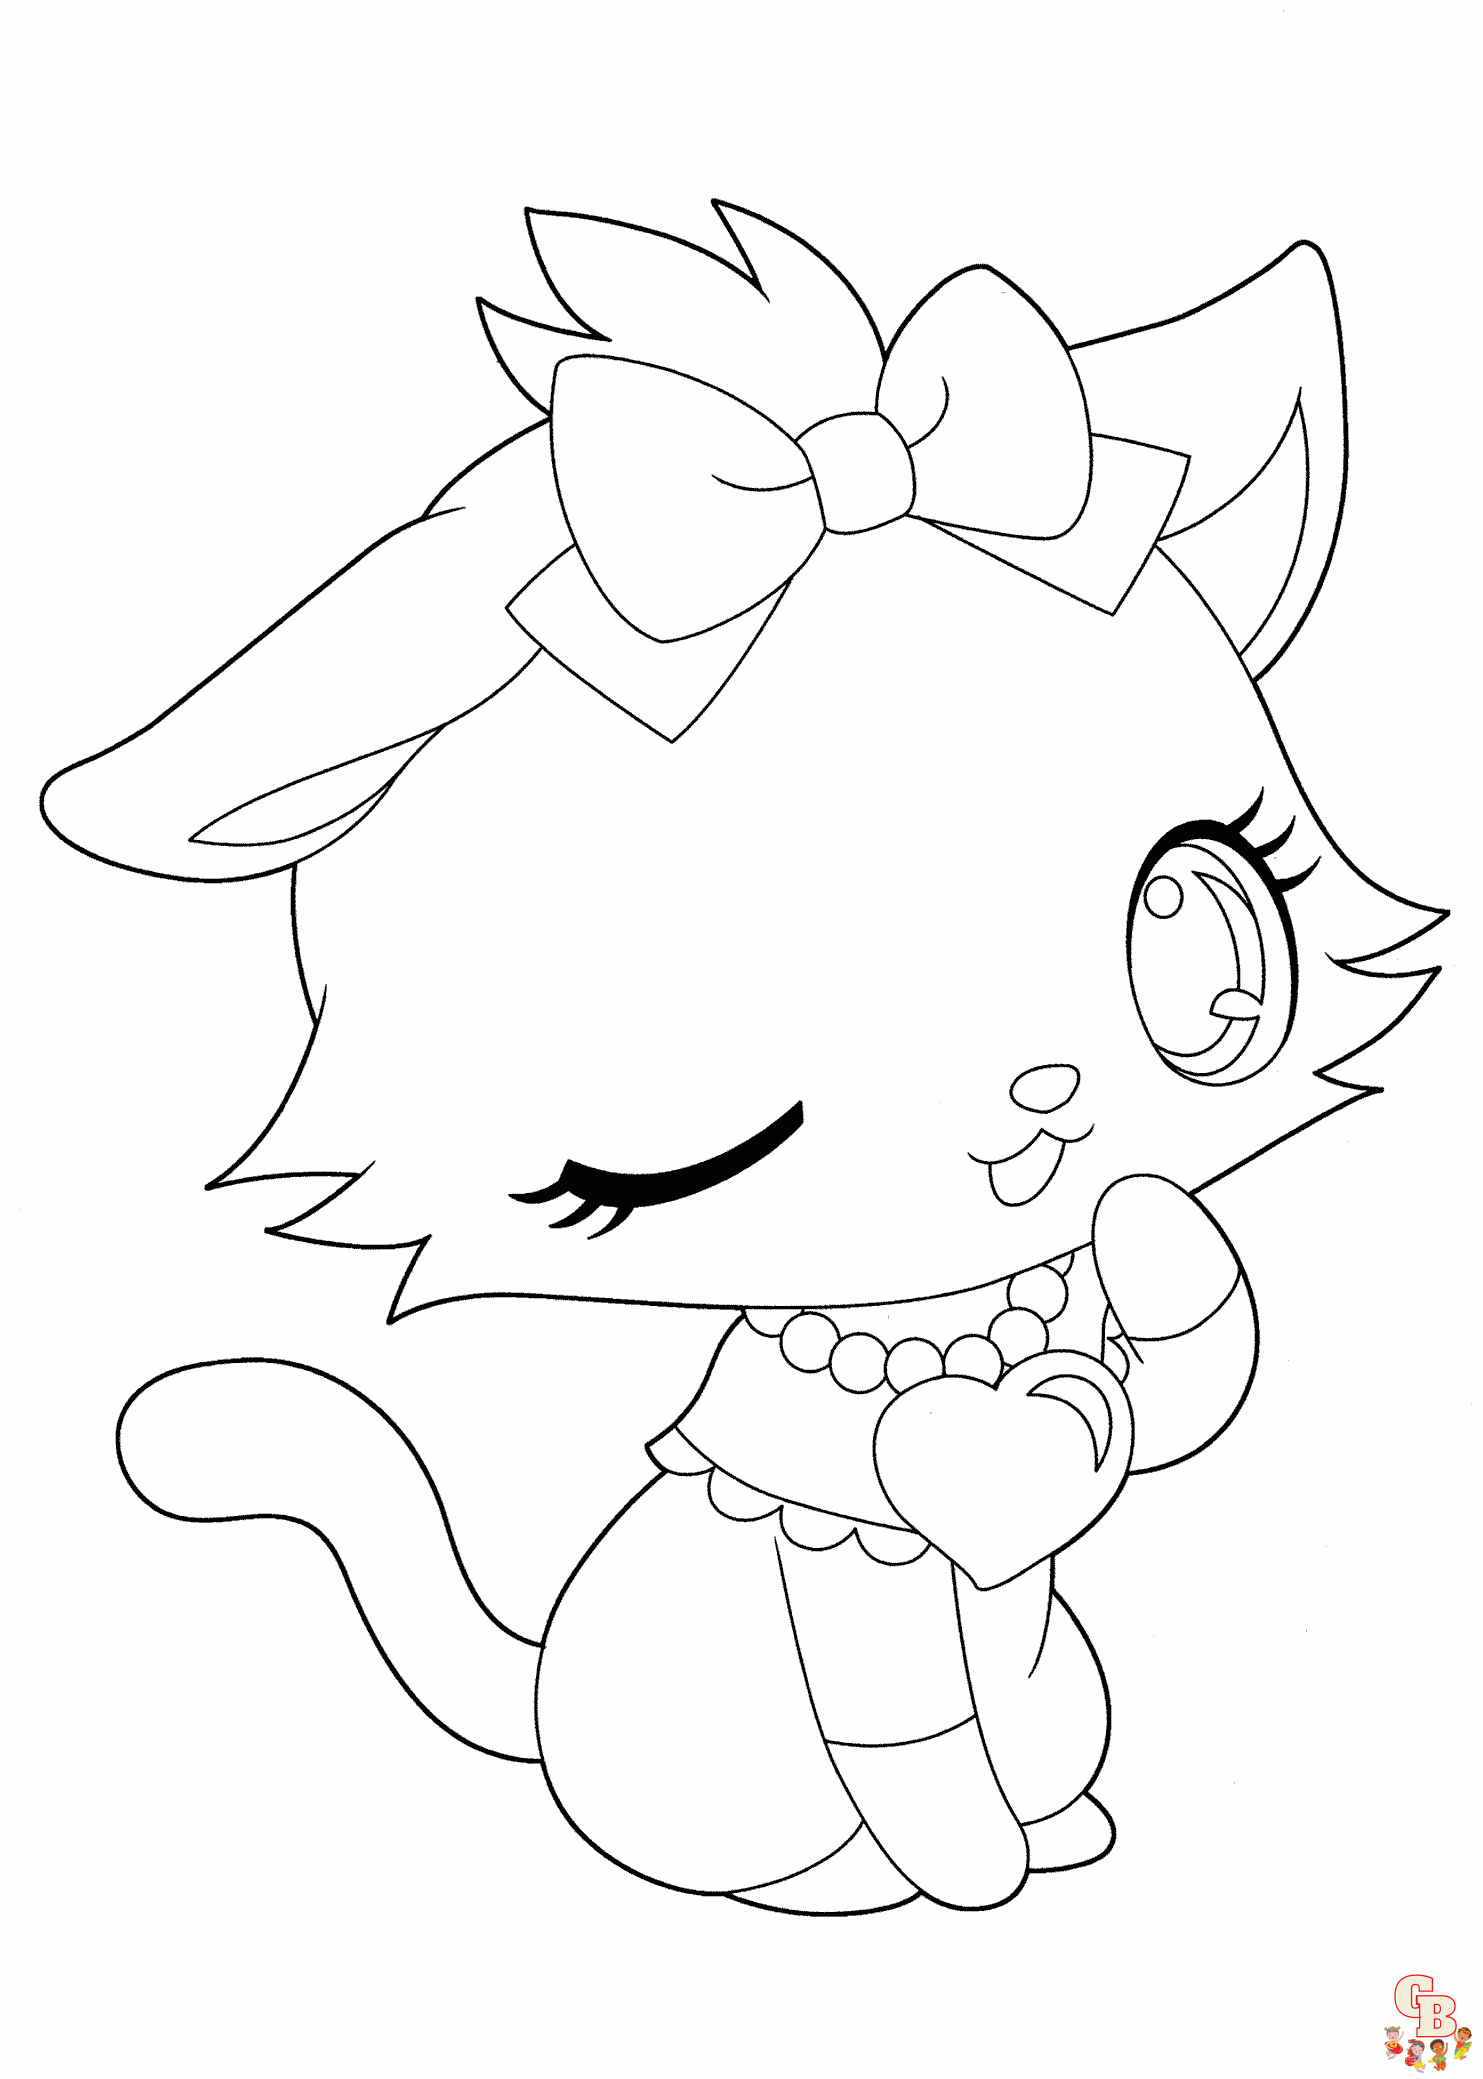 Coloring Page with Cat. Drawing Kids Game. Printable Activity